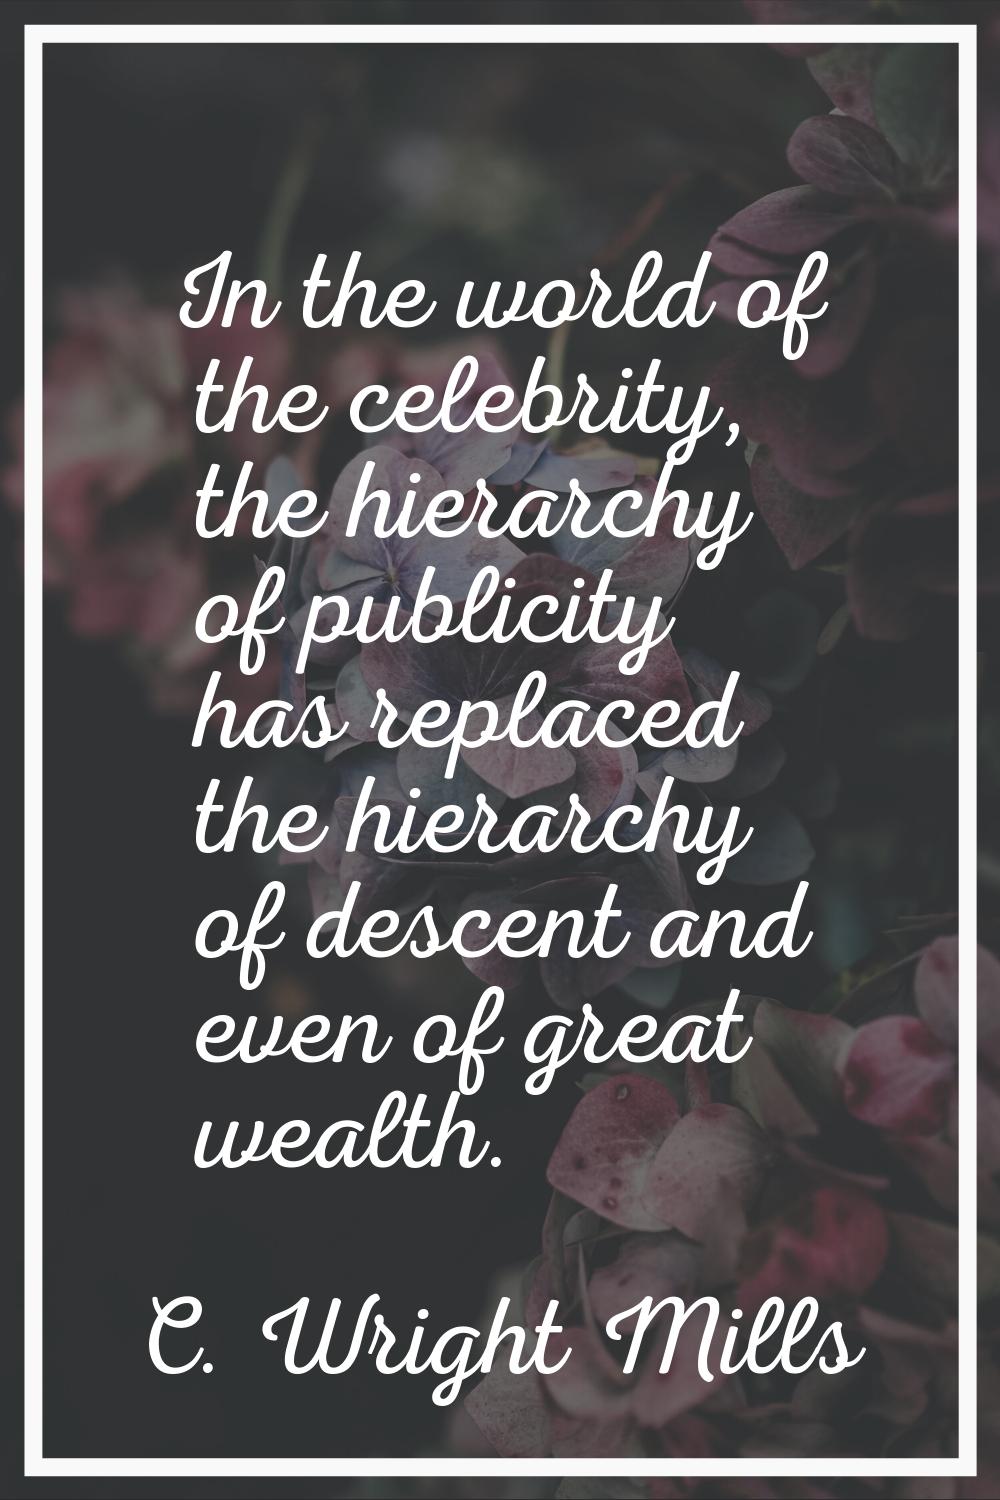 In the world of the celebrity, the hierarchy of publicity has replaced the hierarchy of descent and